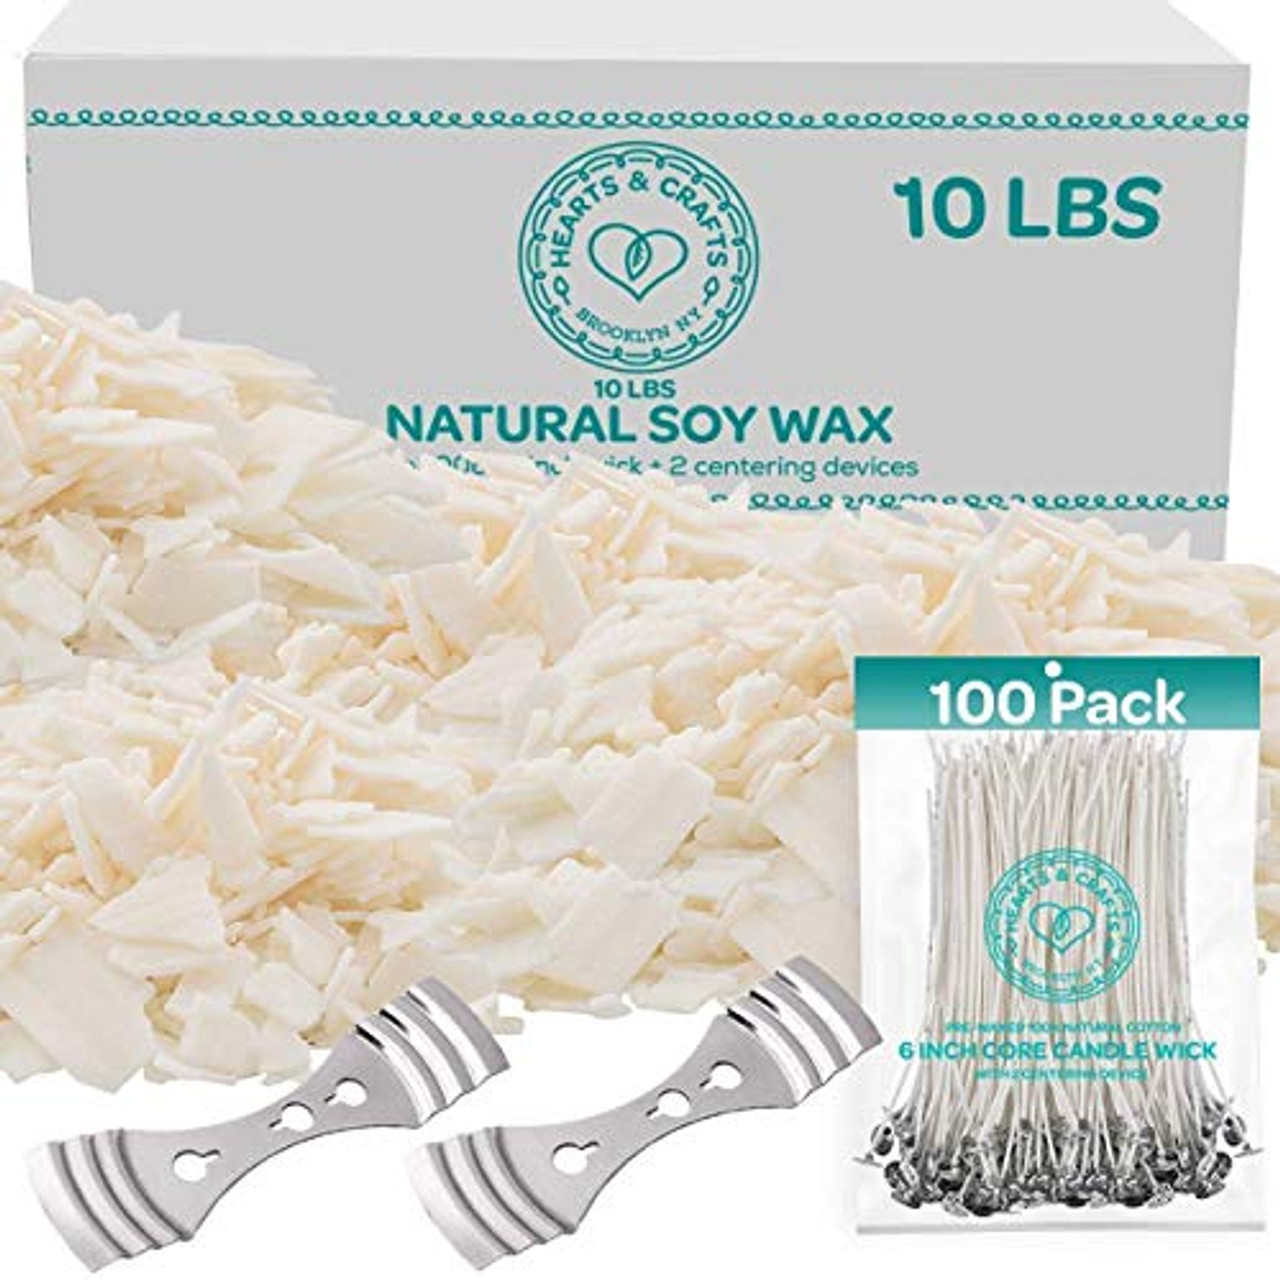 10-lb. Soy Wax Flakes with 8-oz. White Tin Cans, 24-Pack Bundle